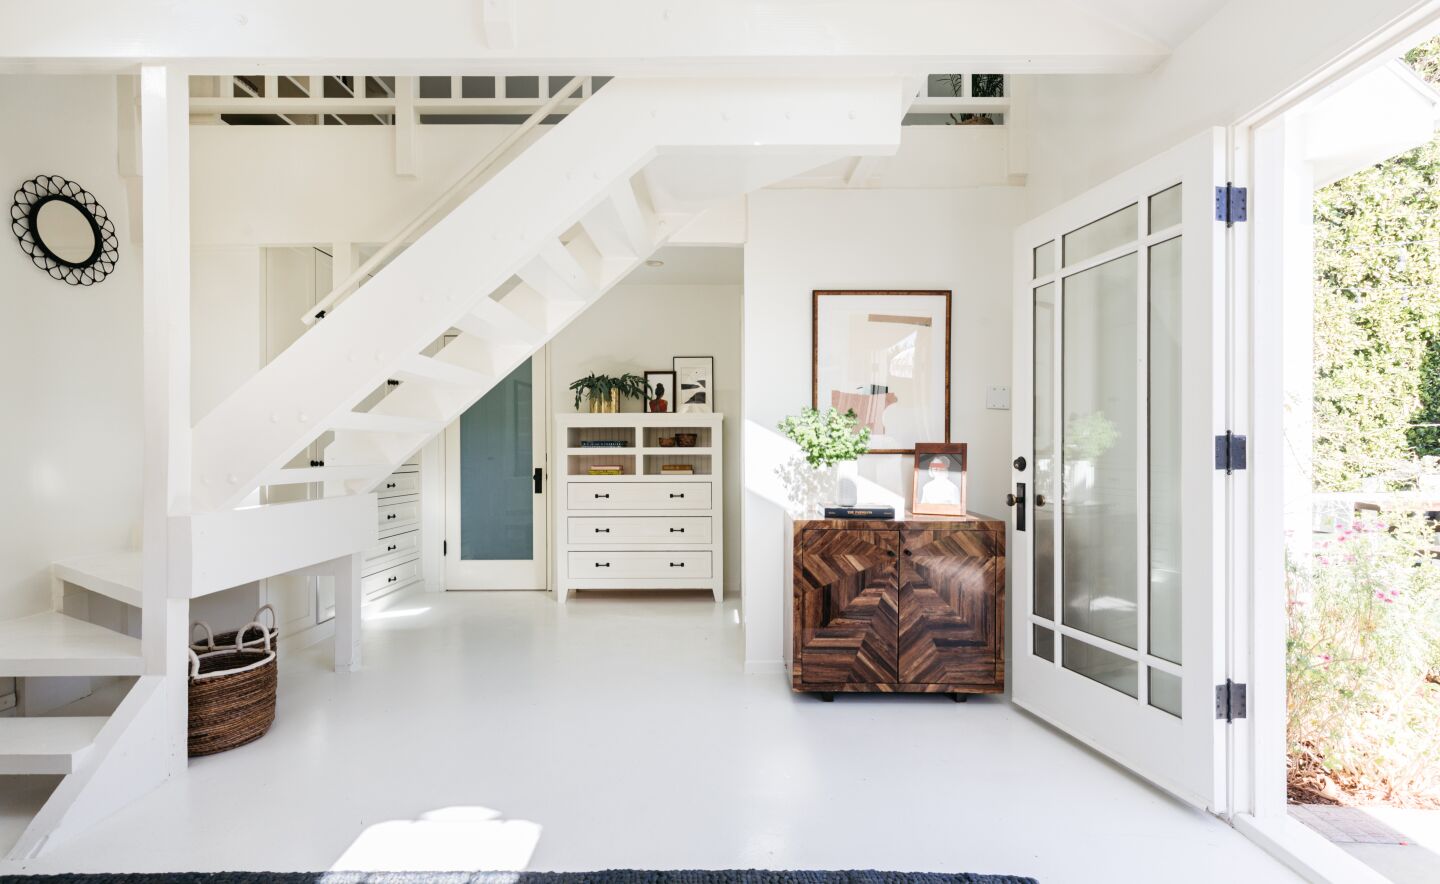 White walls, floors and staircase.